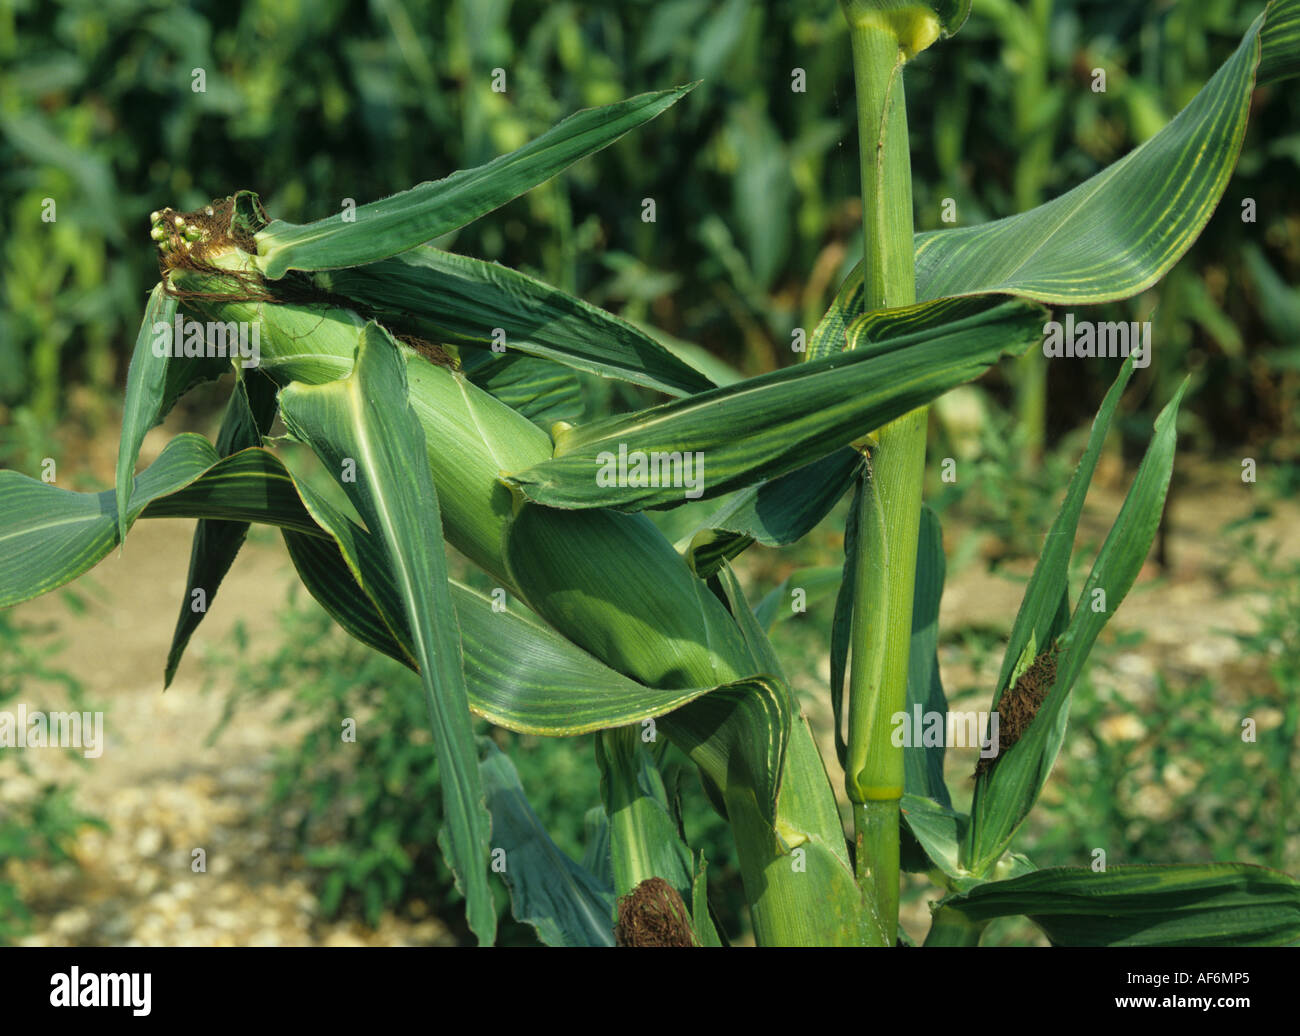 Magnesium deficiency symptoms on cob and leaves of maize or corn Stock Photo